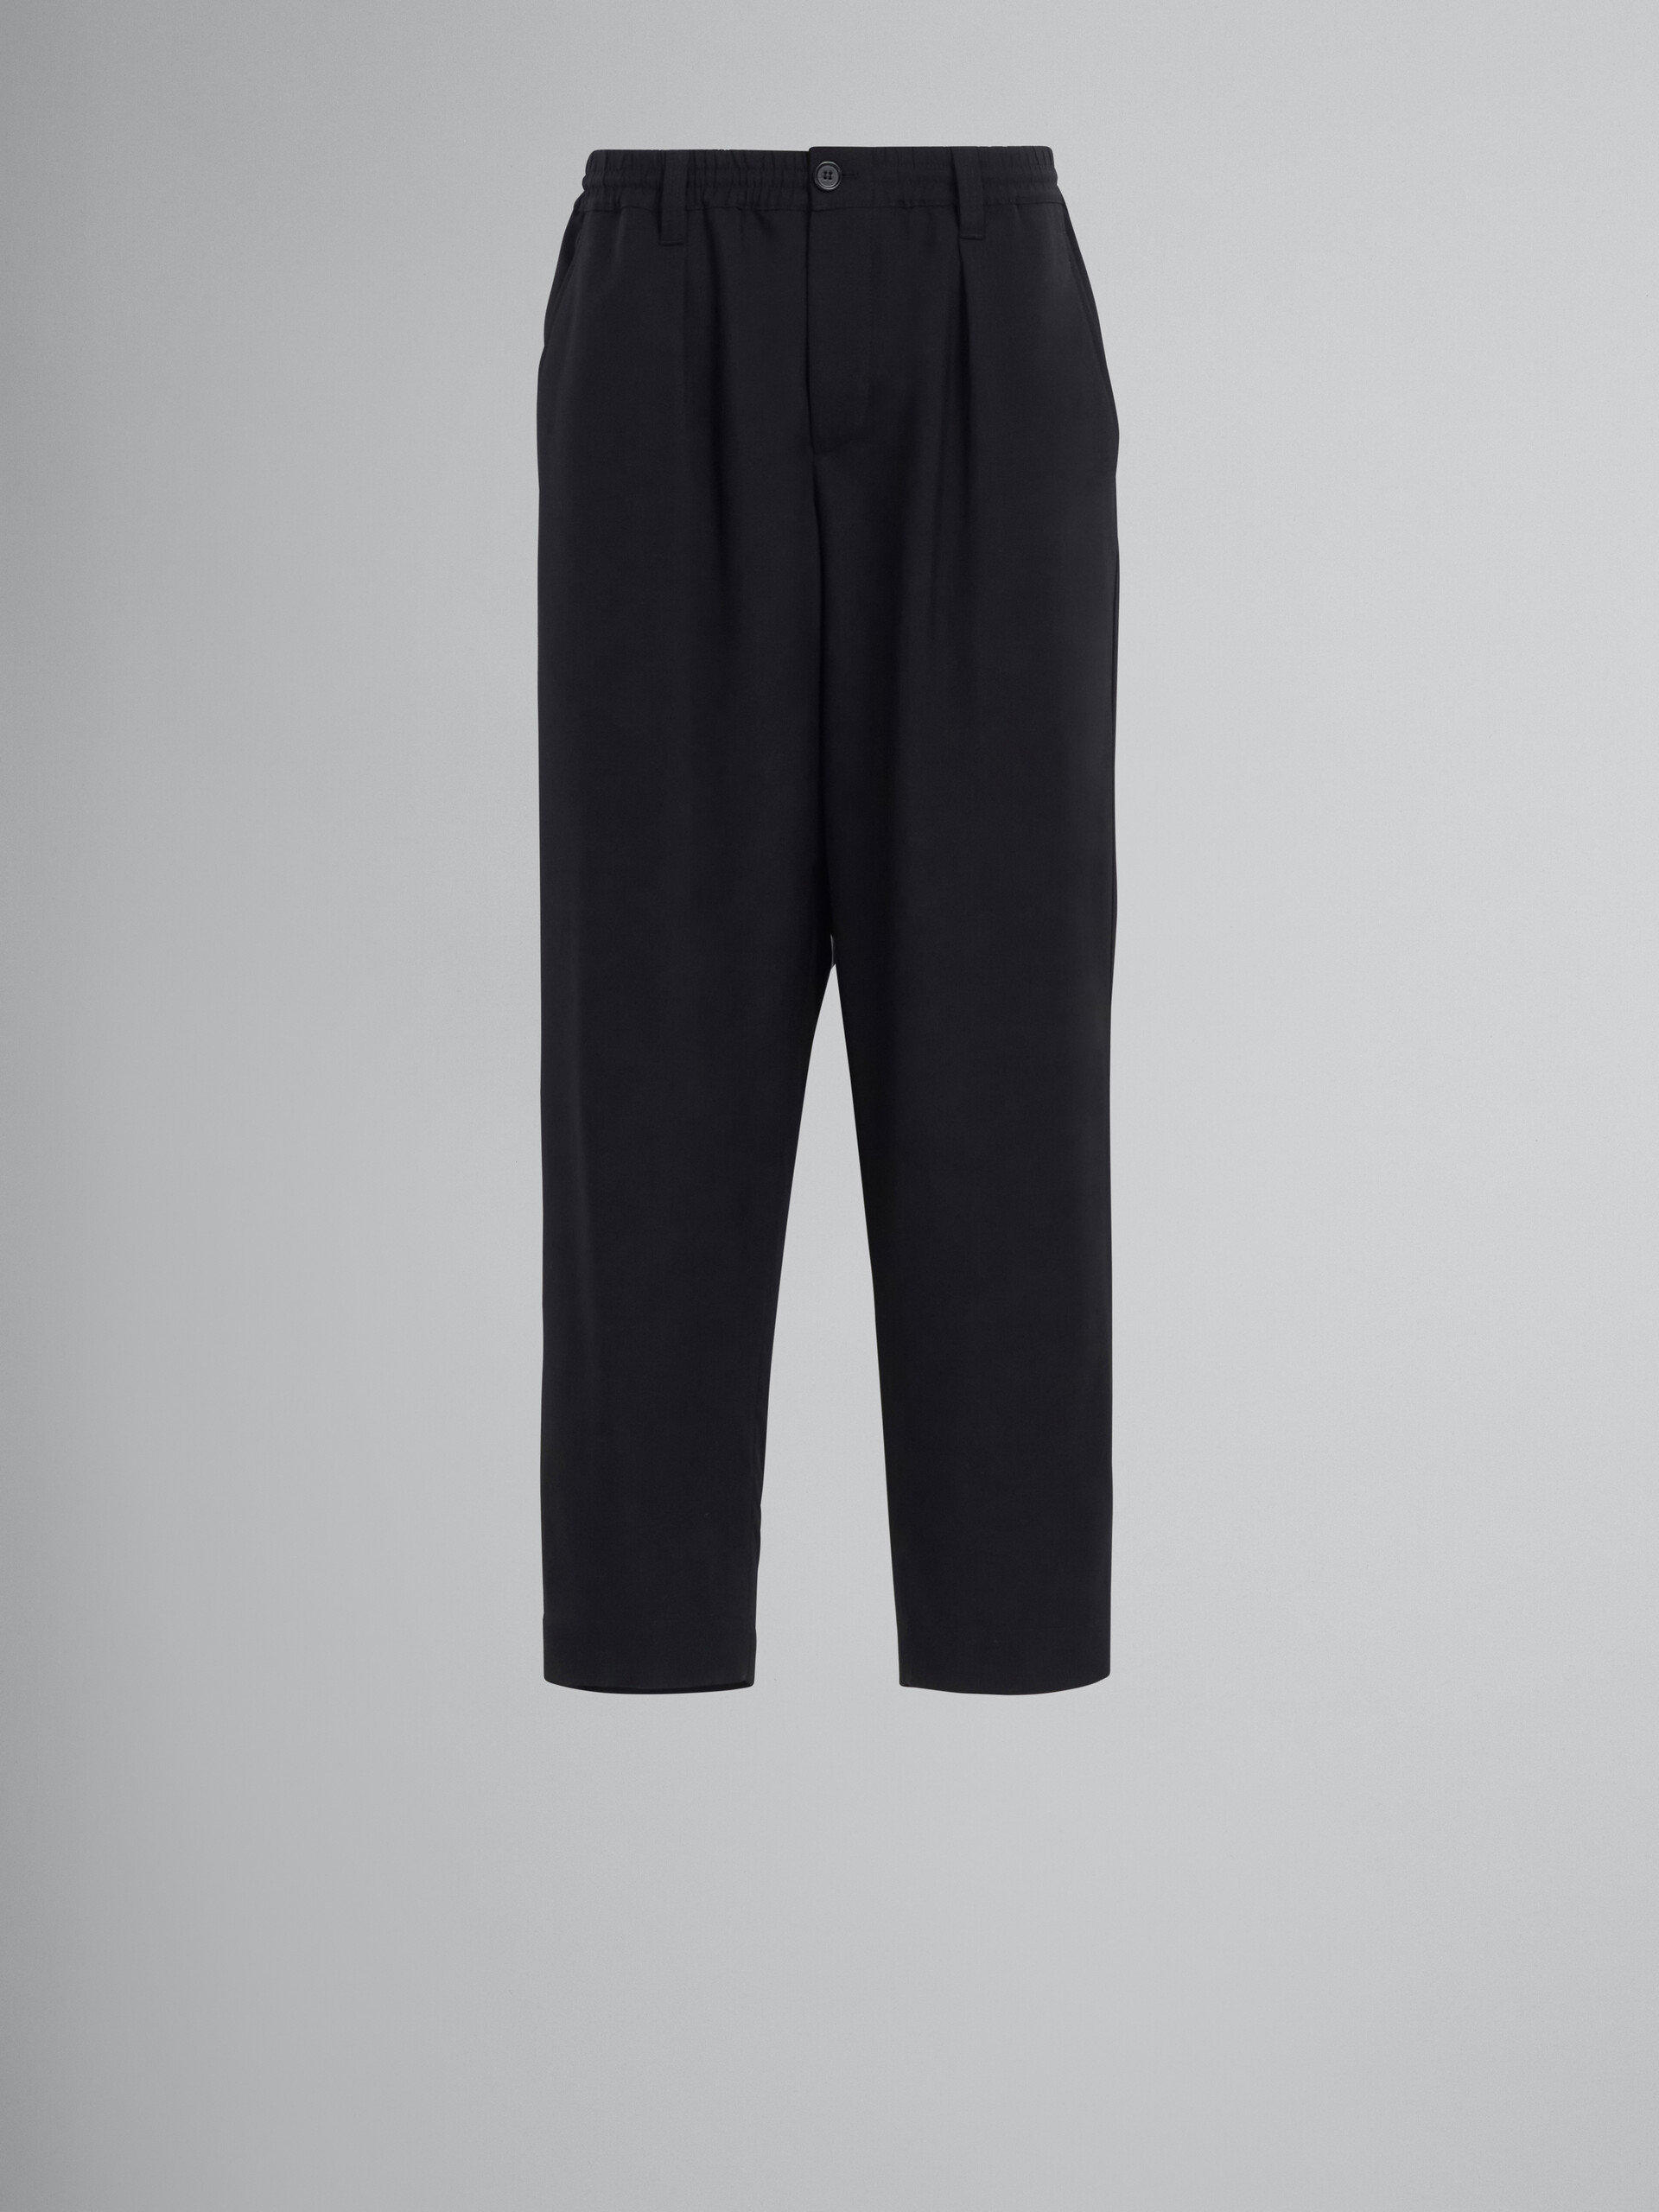 Blue cropped trousers in tropical wool - Pants - Image 1